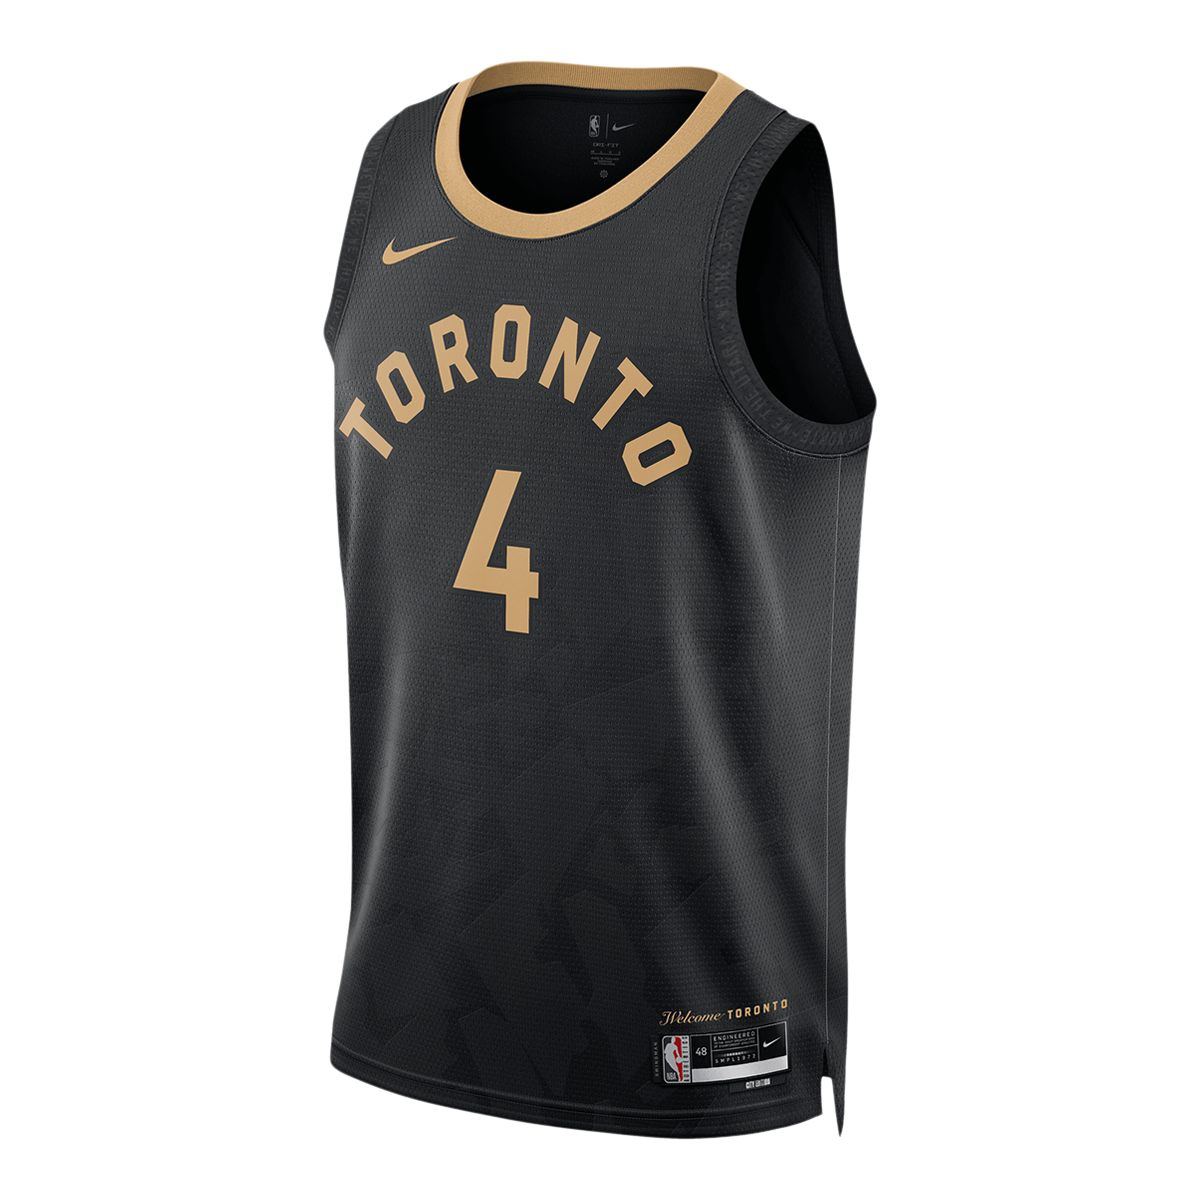 New Raptors city edition jerseys have fans longing for old days